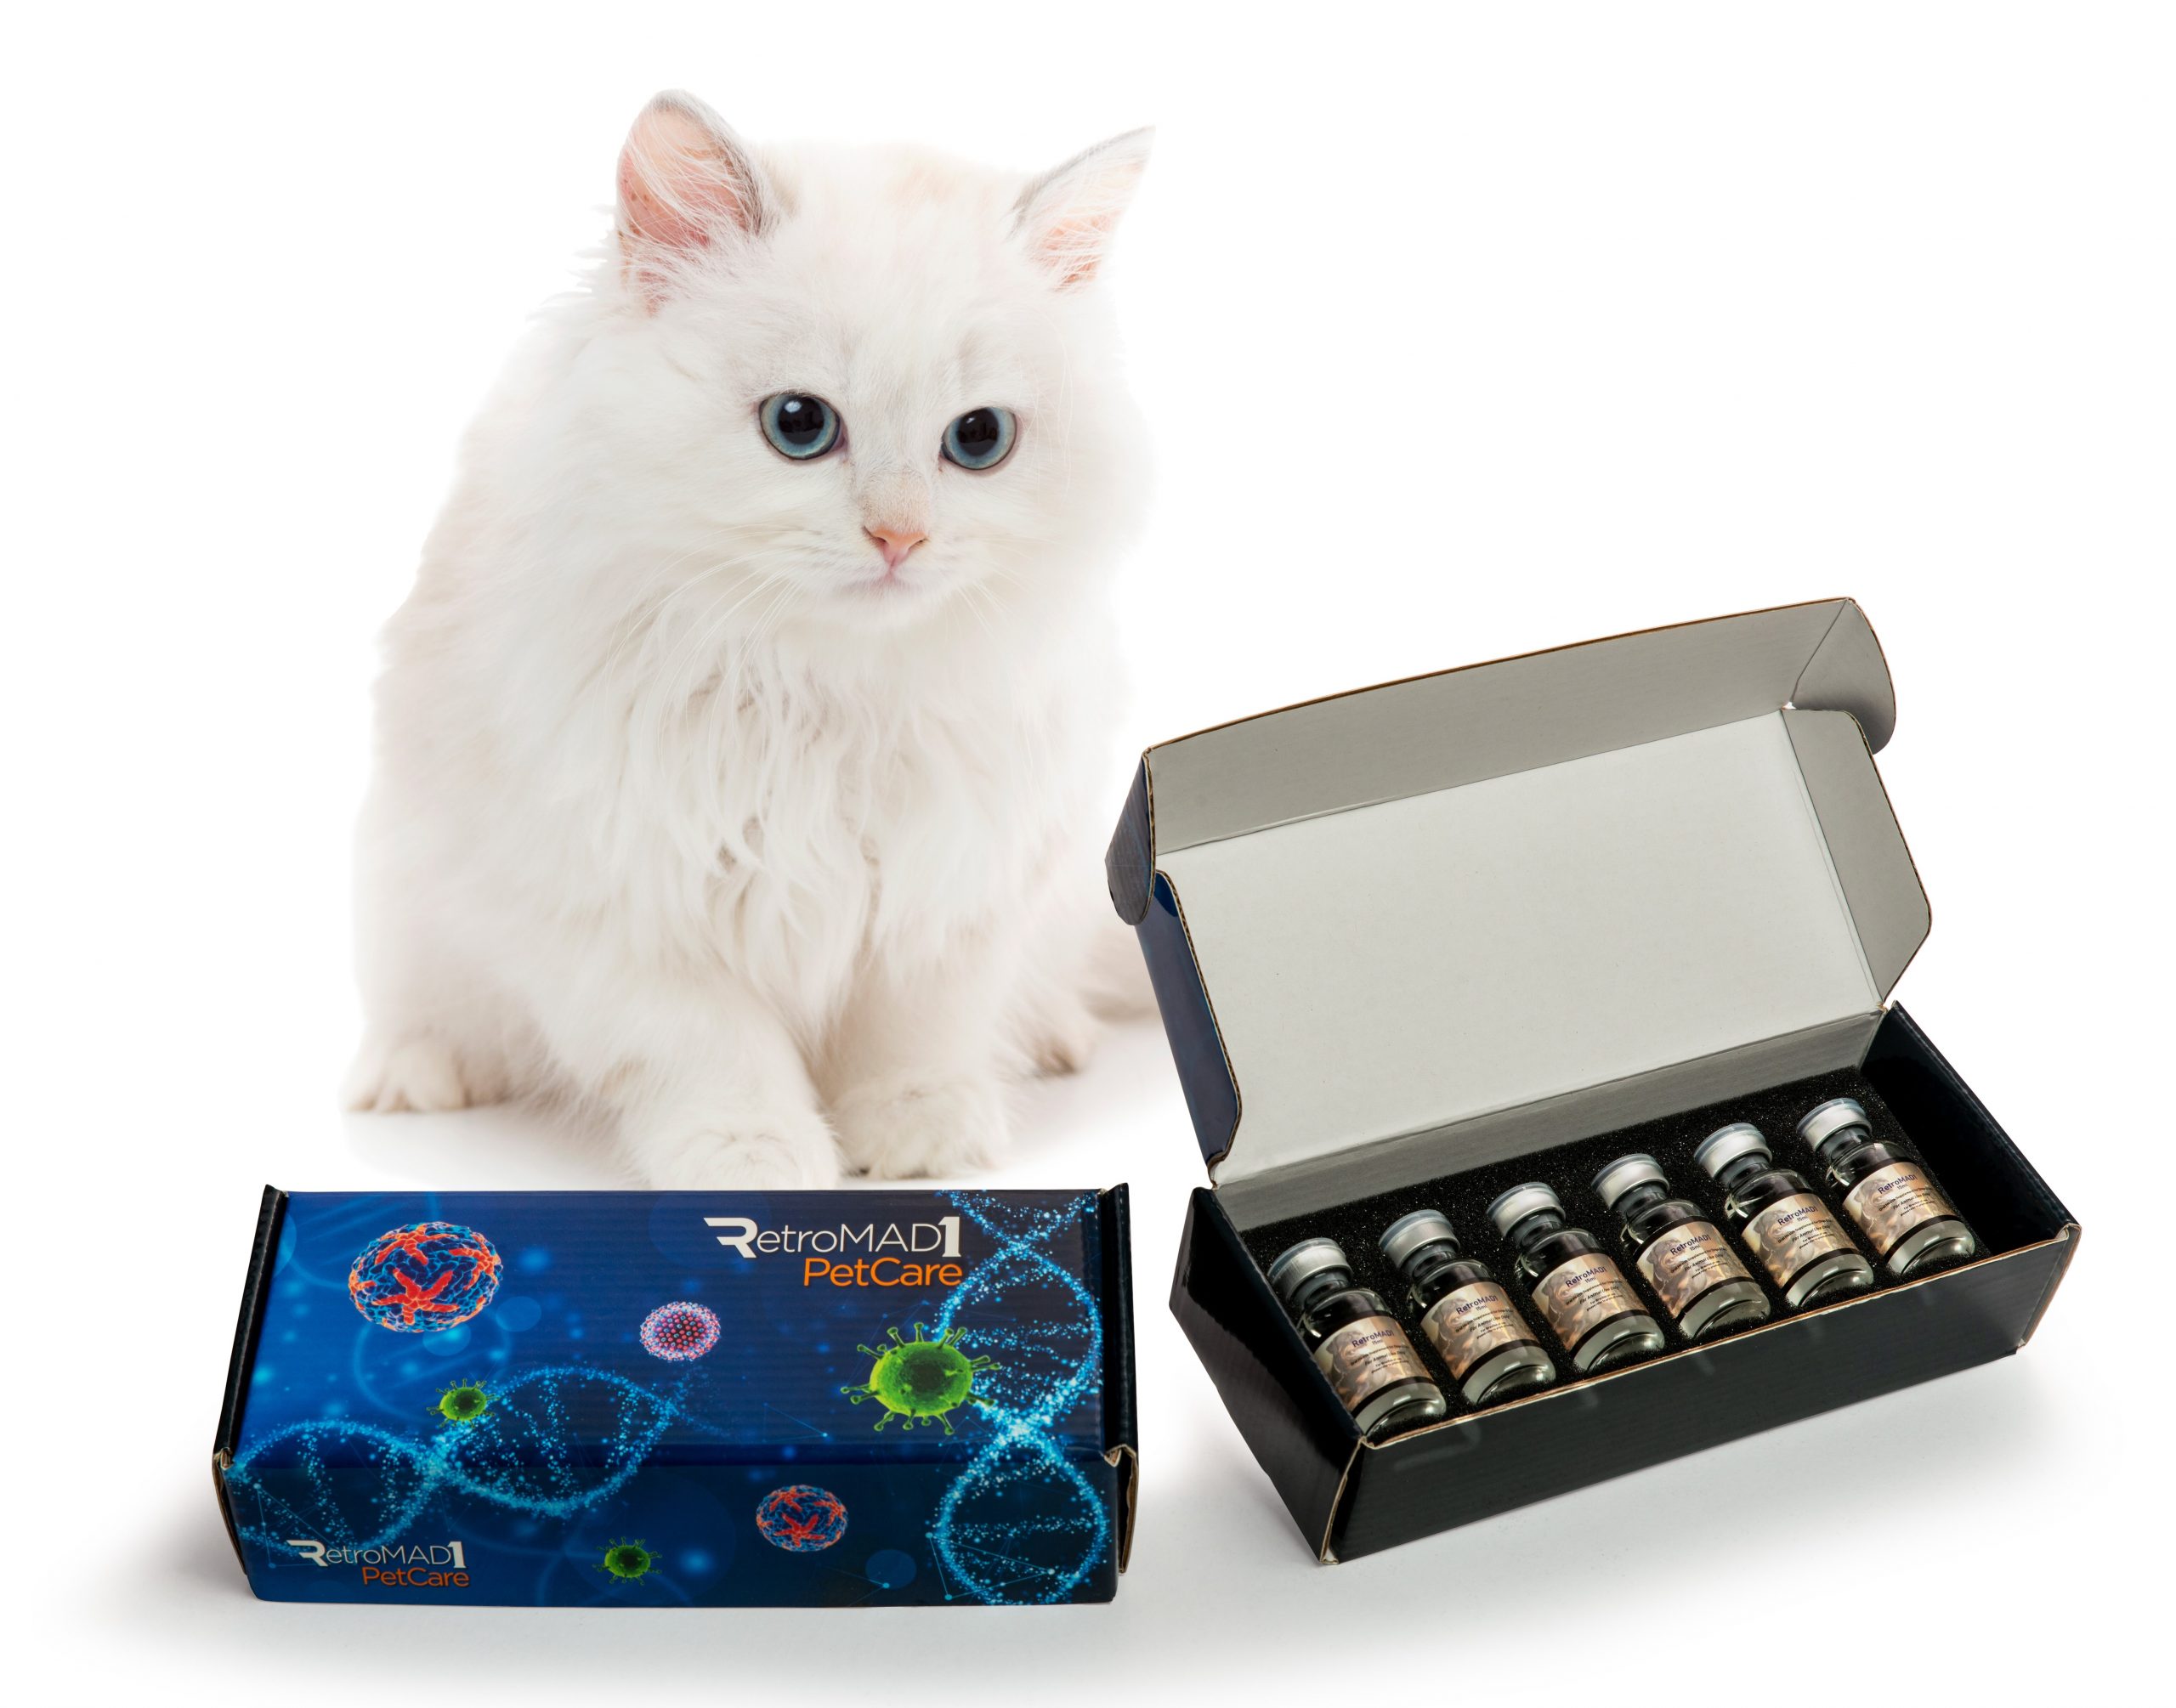 RetroMAD1 box for 15mL (with cat image)